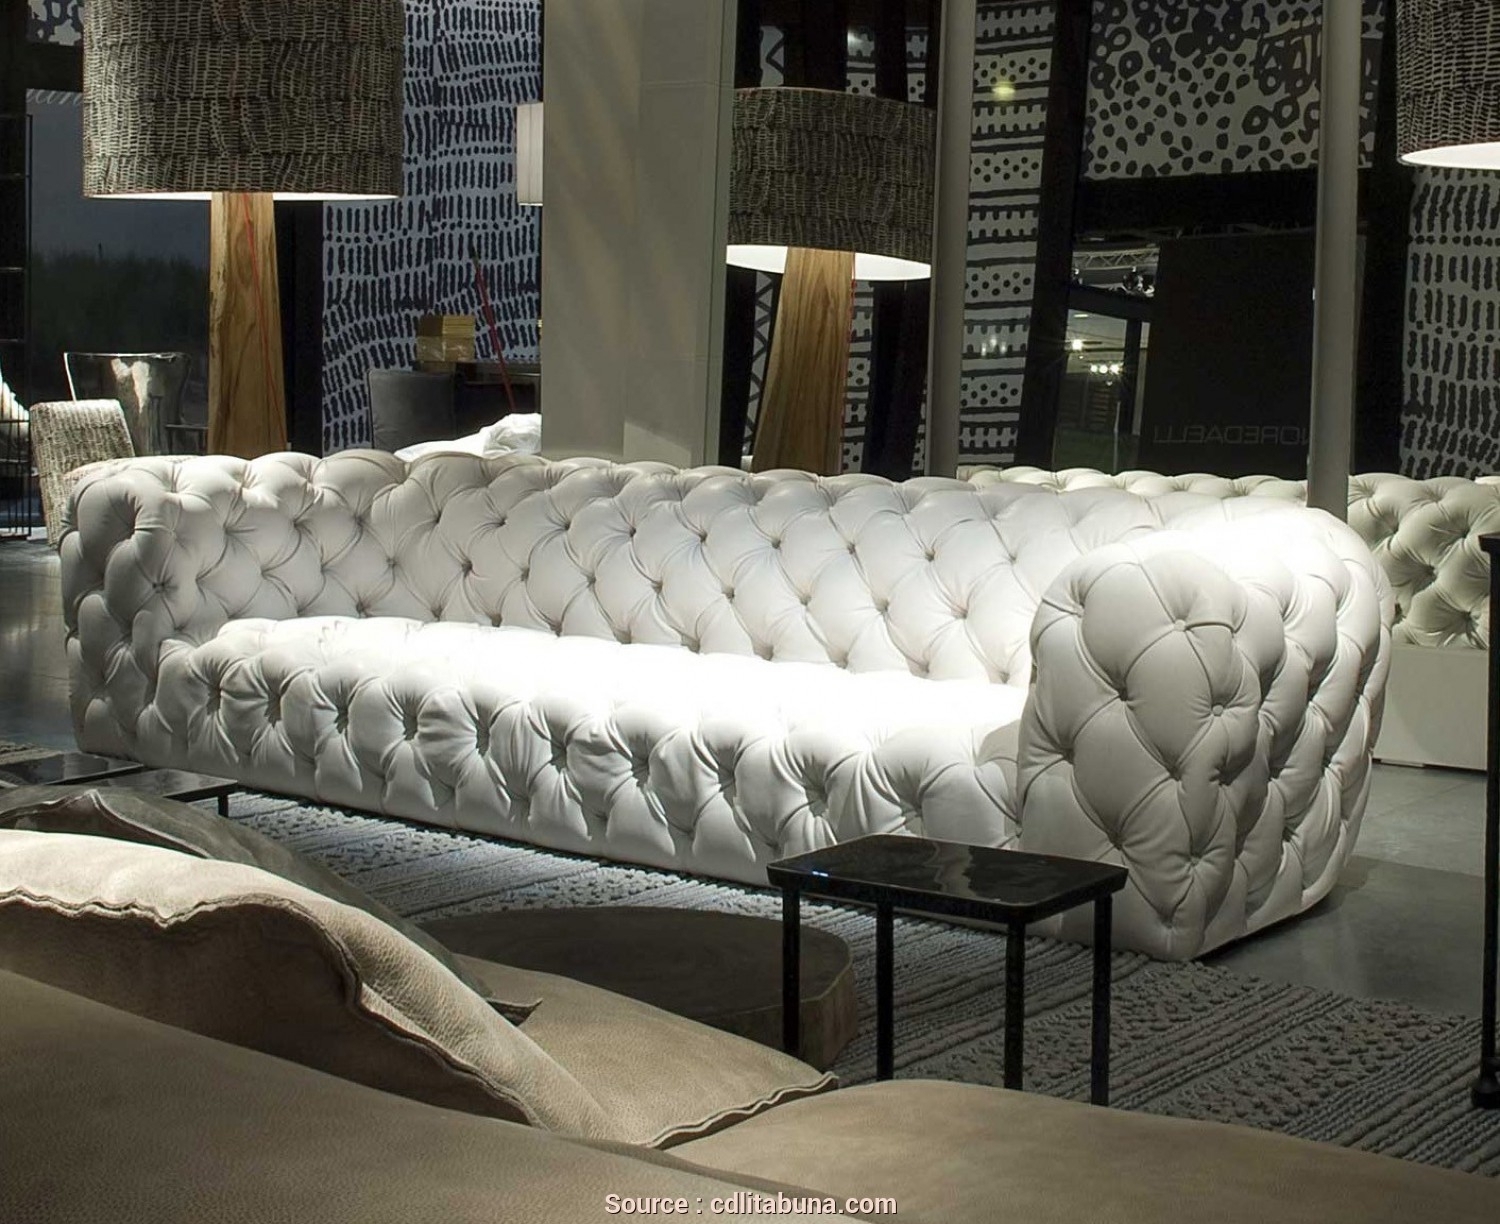 tufted leather pull out sofa